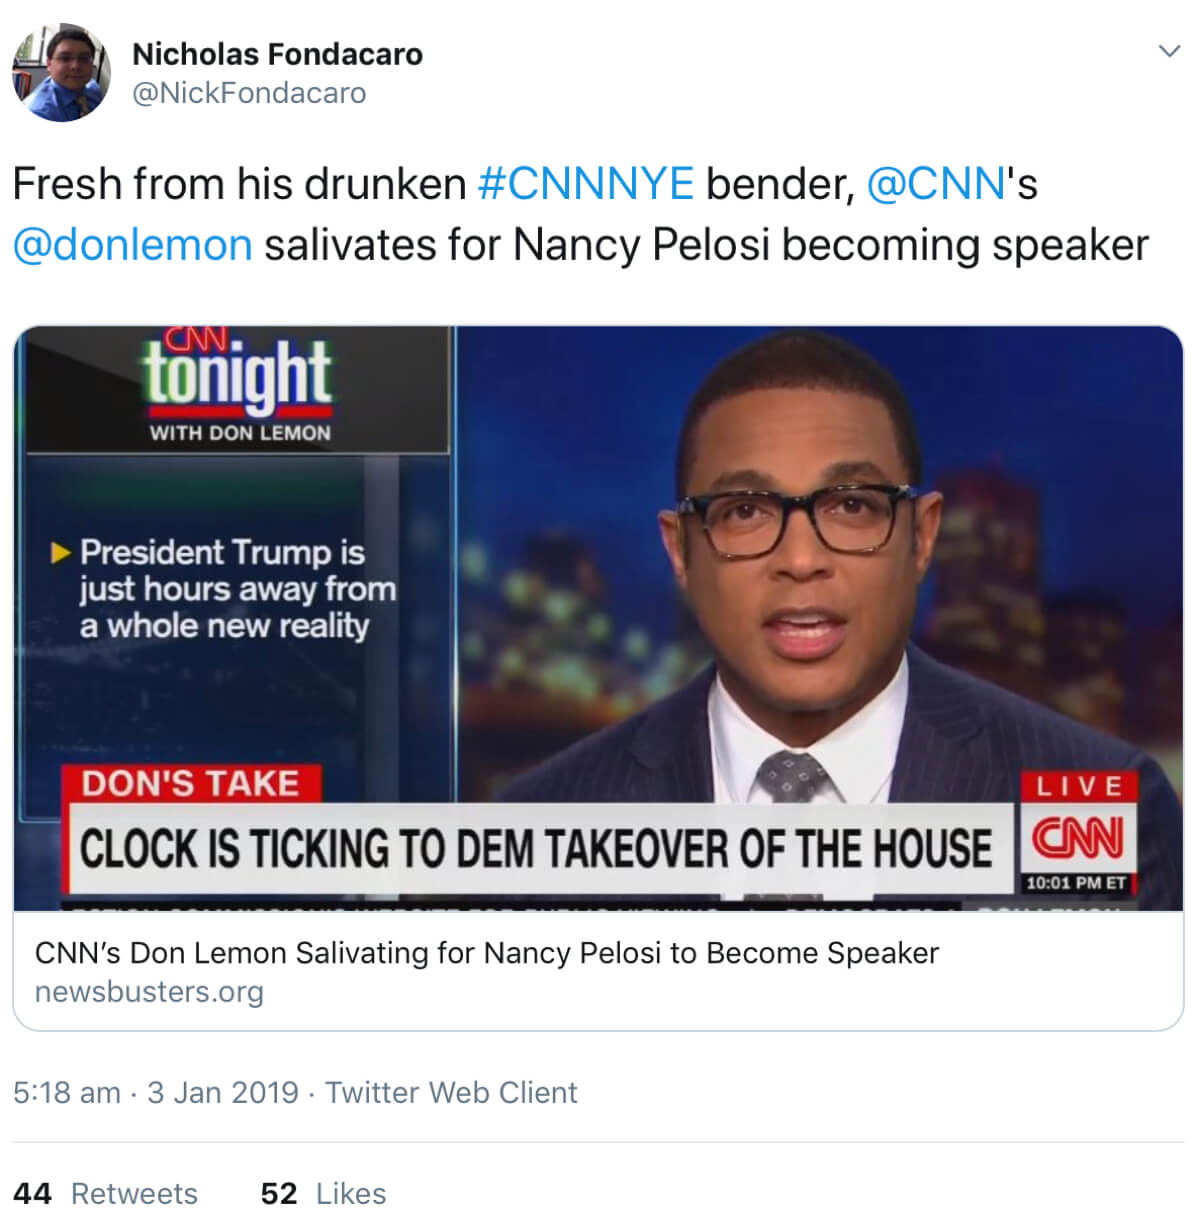 A tweet from @NickFondacaro which links to an article criticizing the CNN anchor Don Lemon.